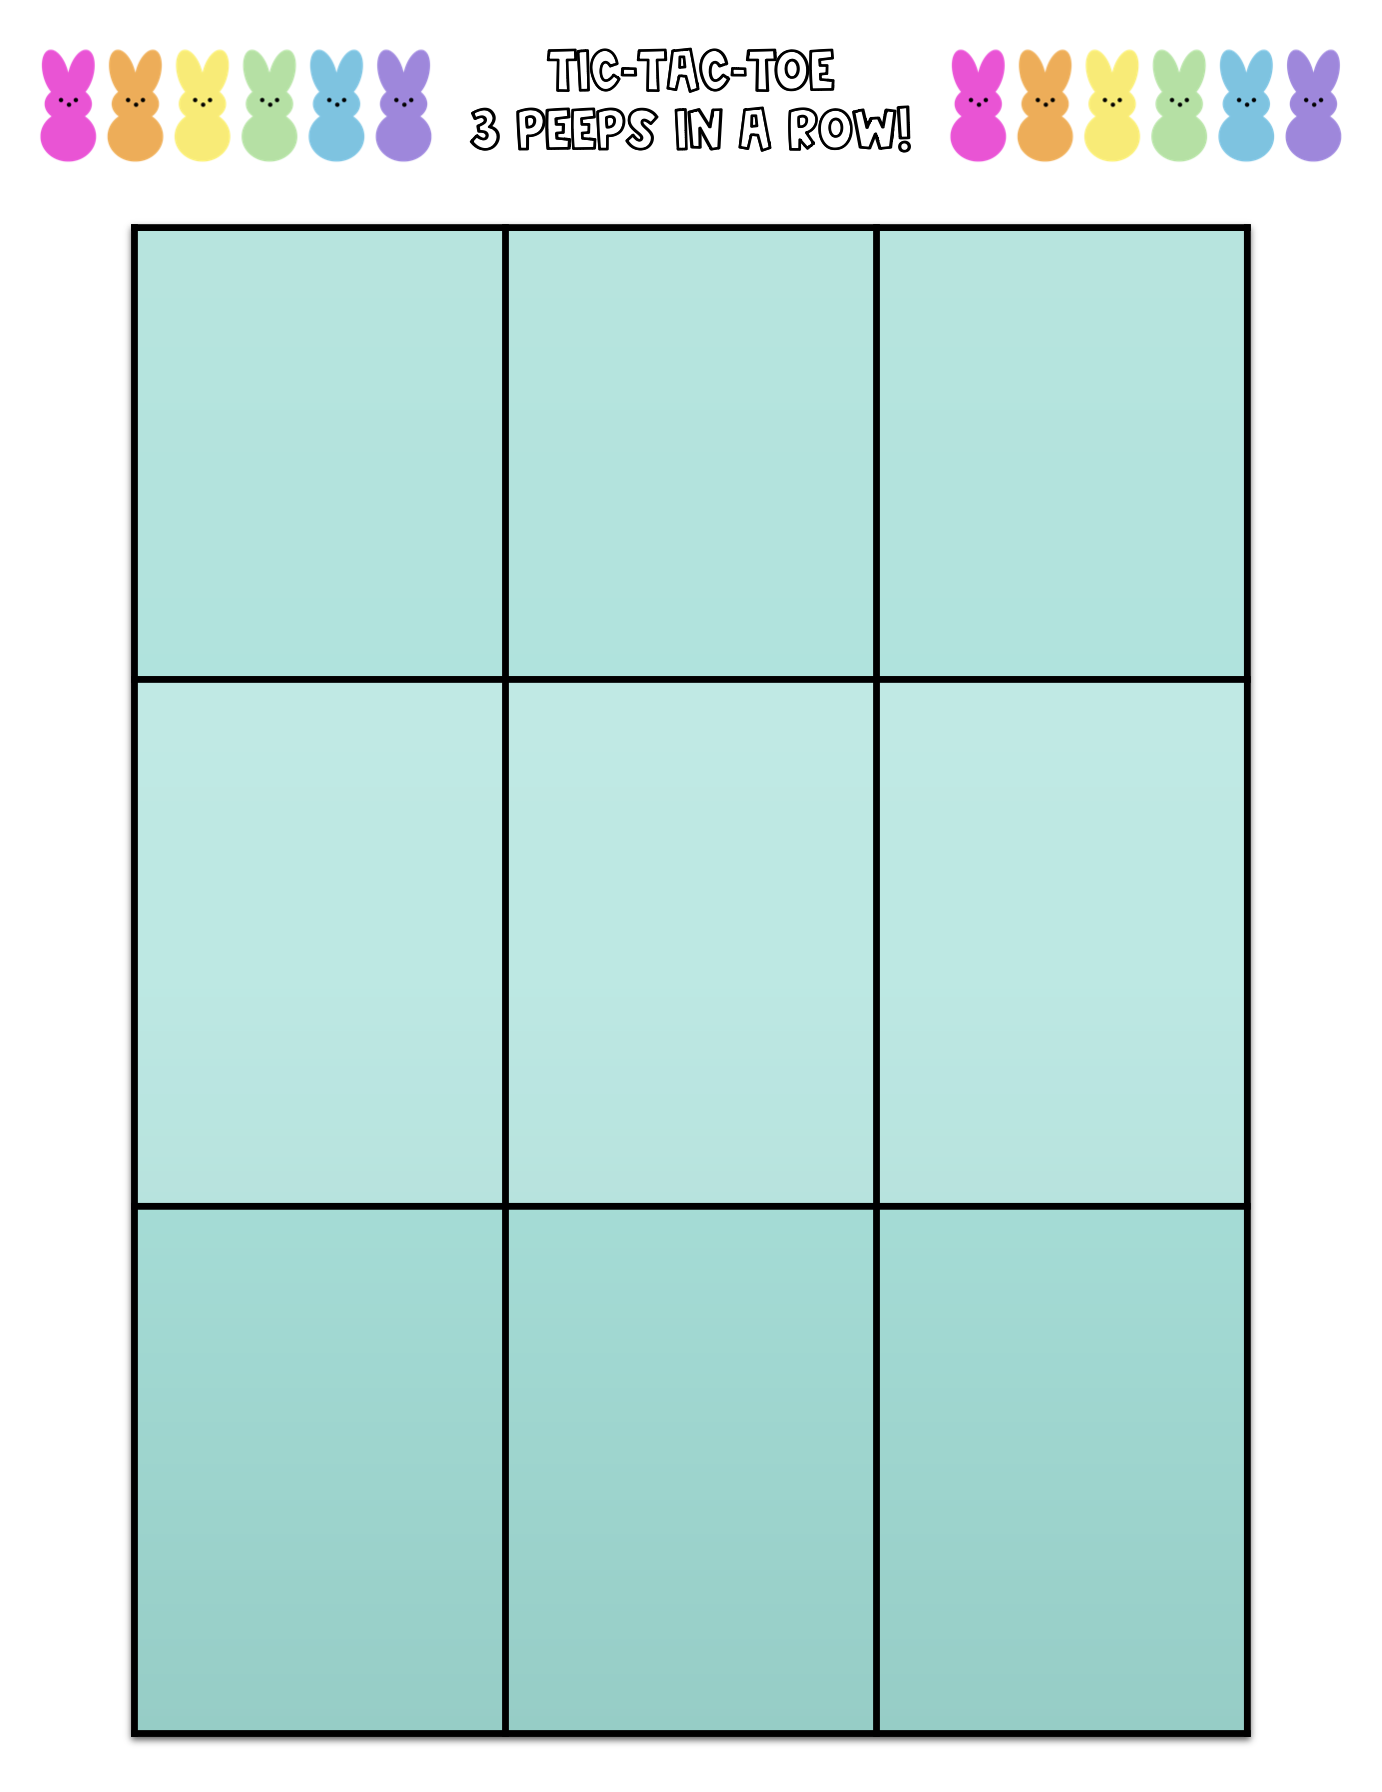 a nine box grid used for playing tic tac toe 3 peeps in a row speech therapy game